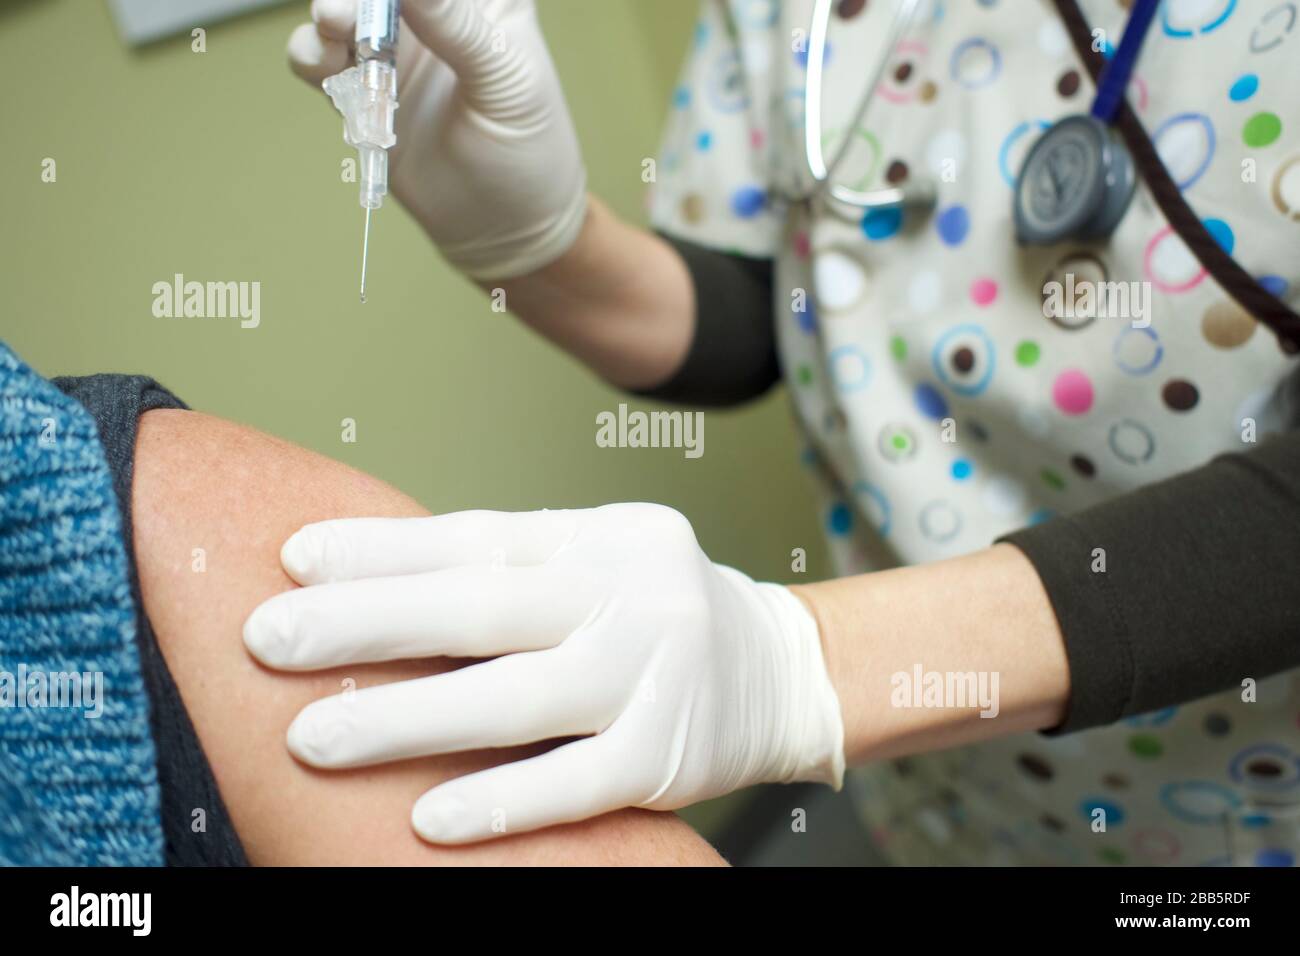 Nurse preparing to administer vaccine, Coronavirus, Covid-19 or Influenza shot. Skilled nurse in doctor's office or hospital immunizing and prevention Stock Photo